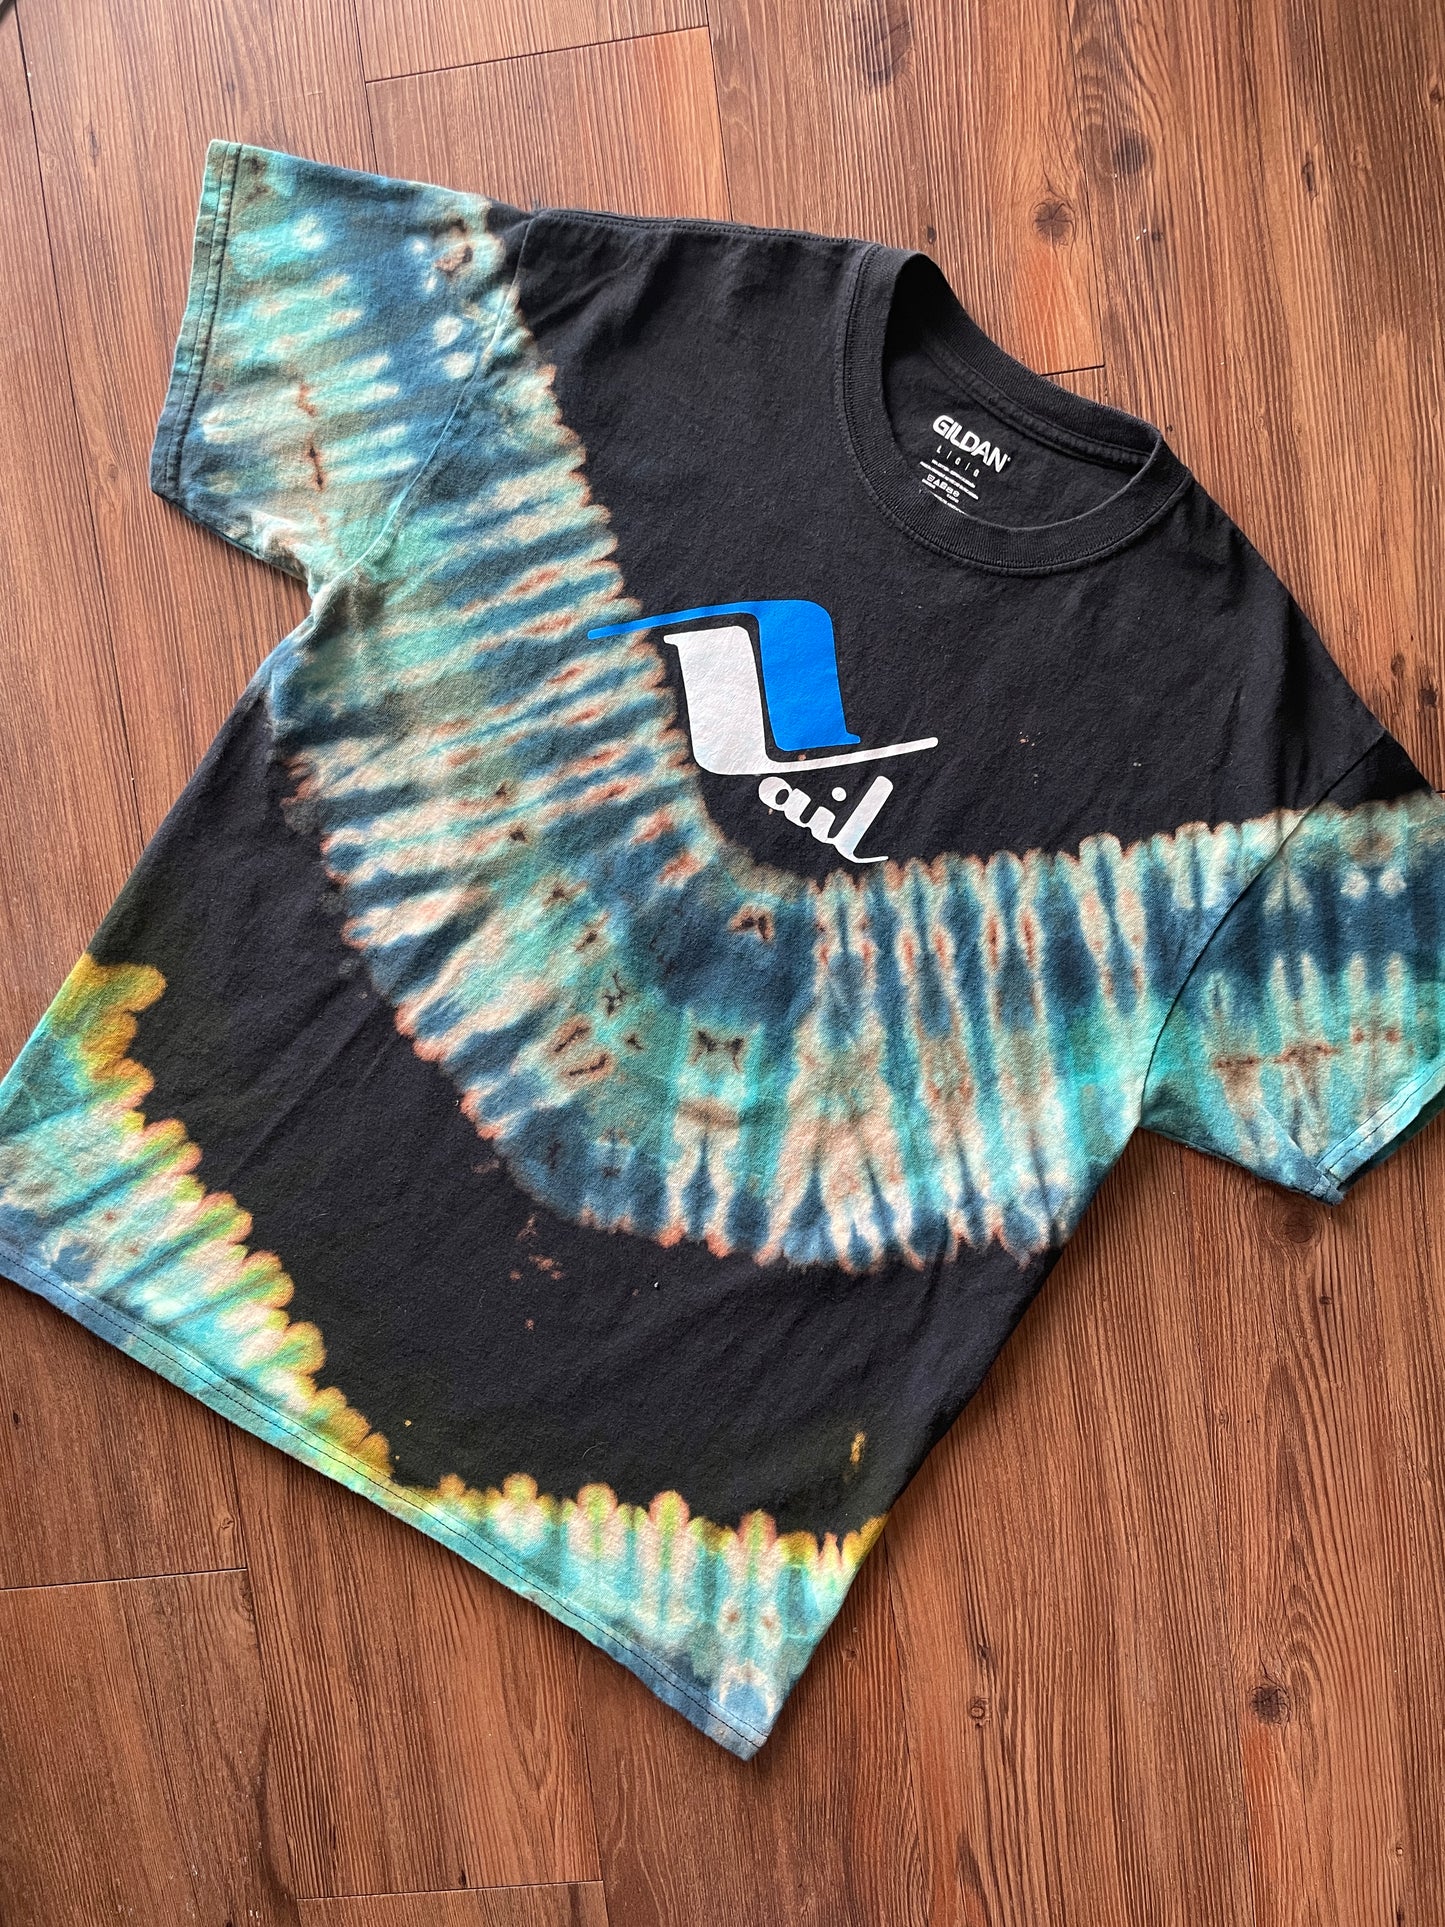 LARGE Men’s Vail Tie Dye T-Shirt | Shades of Blue Pleated Tie Dye Short Sleeve Top